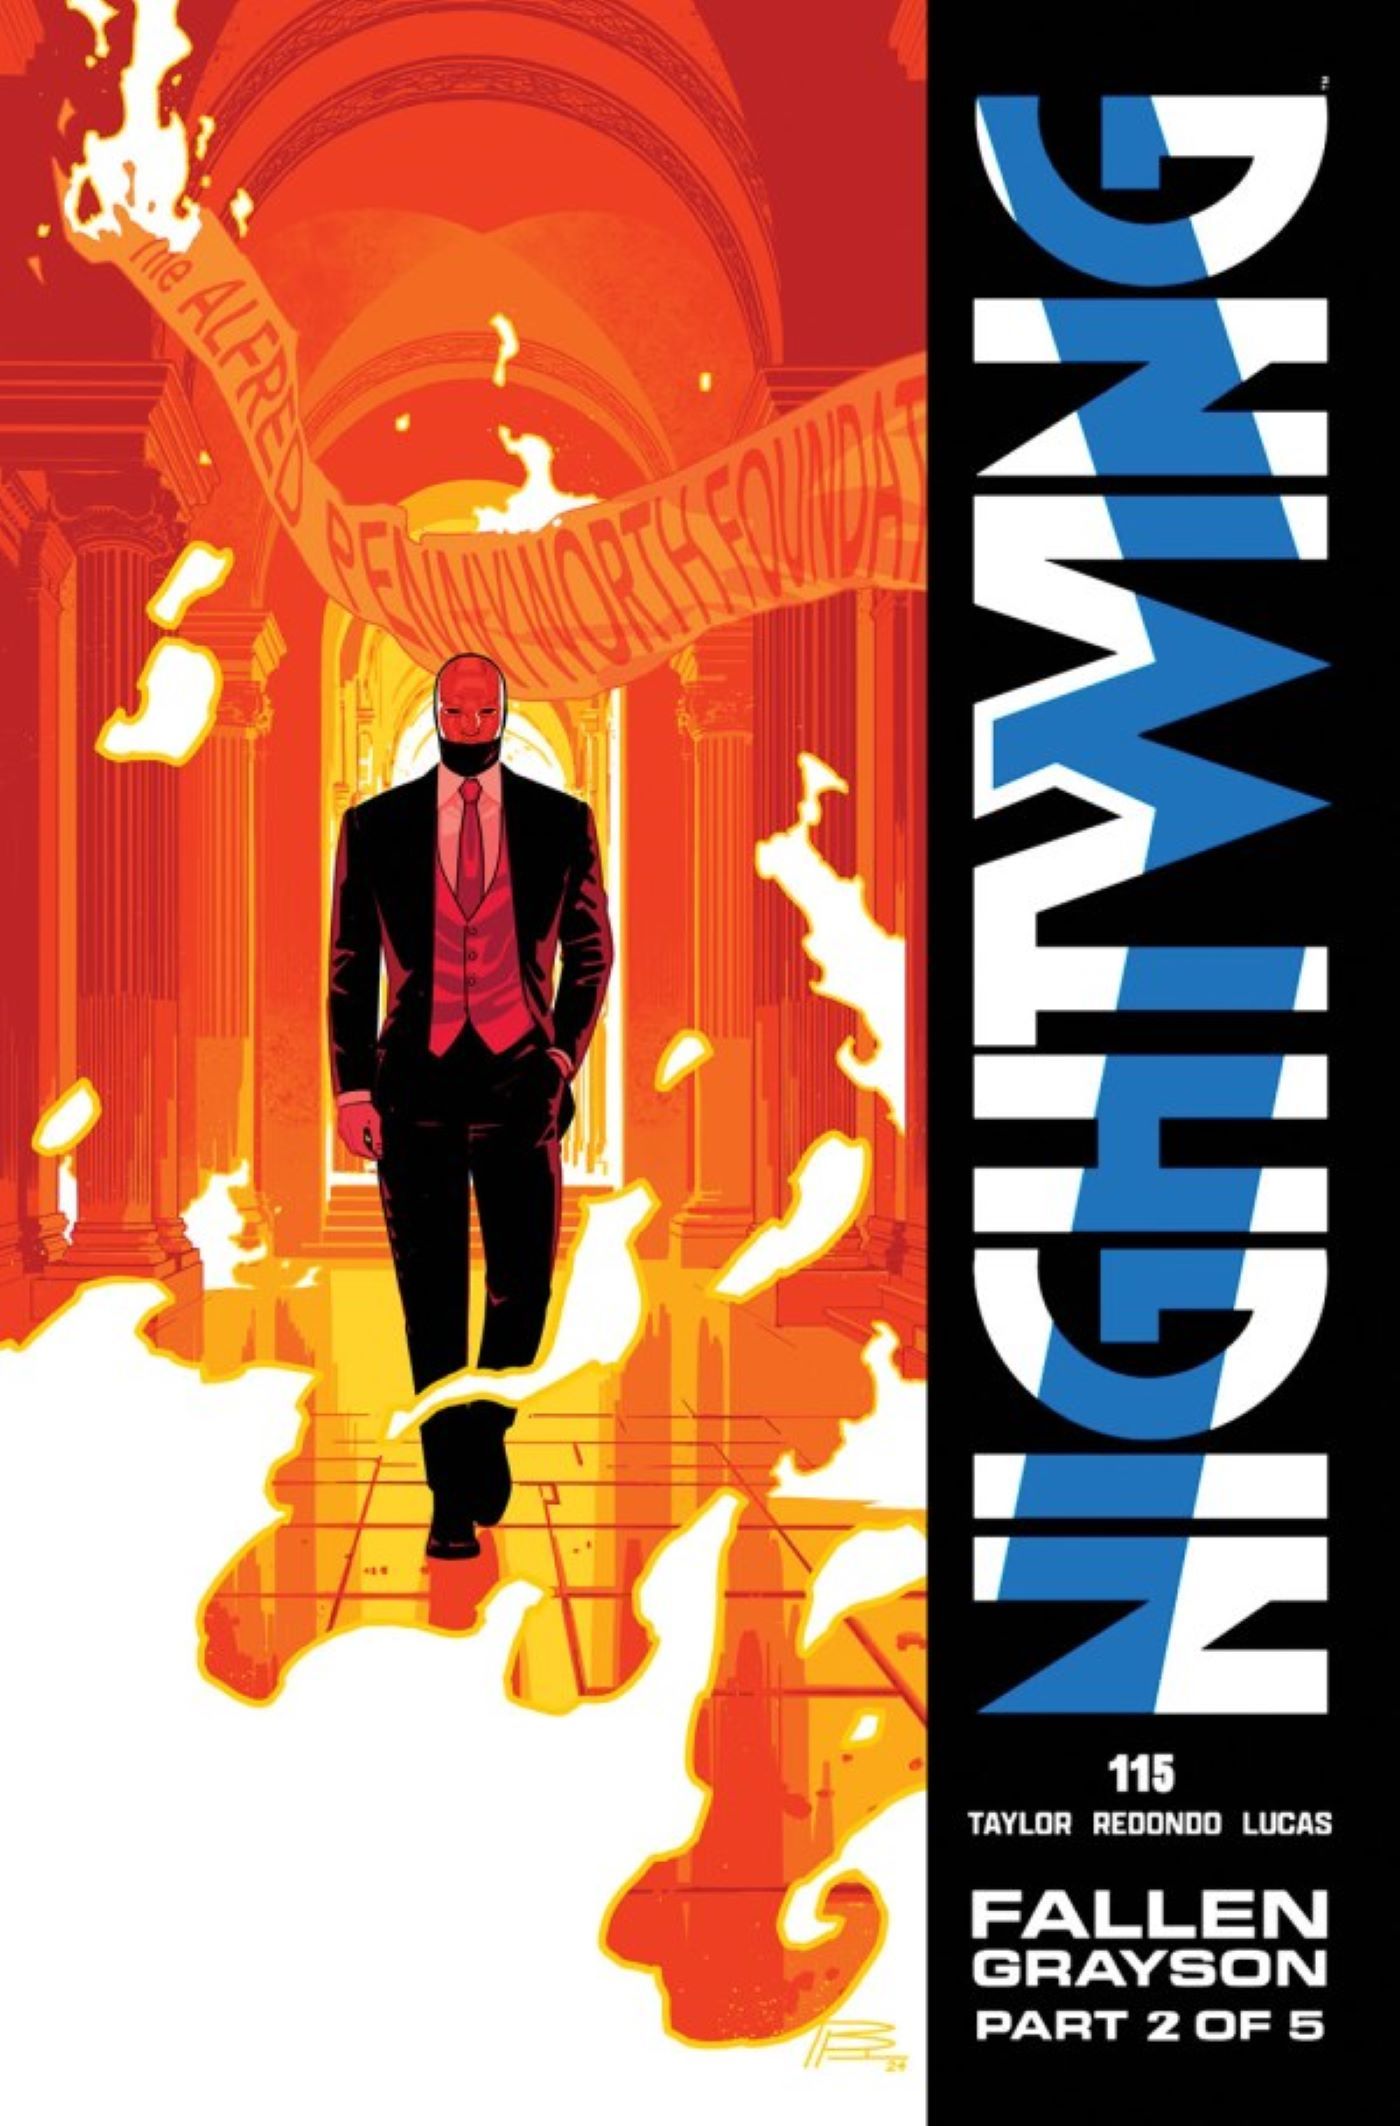 Nightwing 115 Main Cover: Heartless walking forward in a burning building.